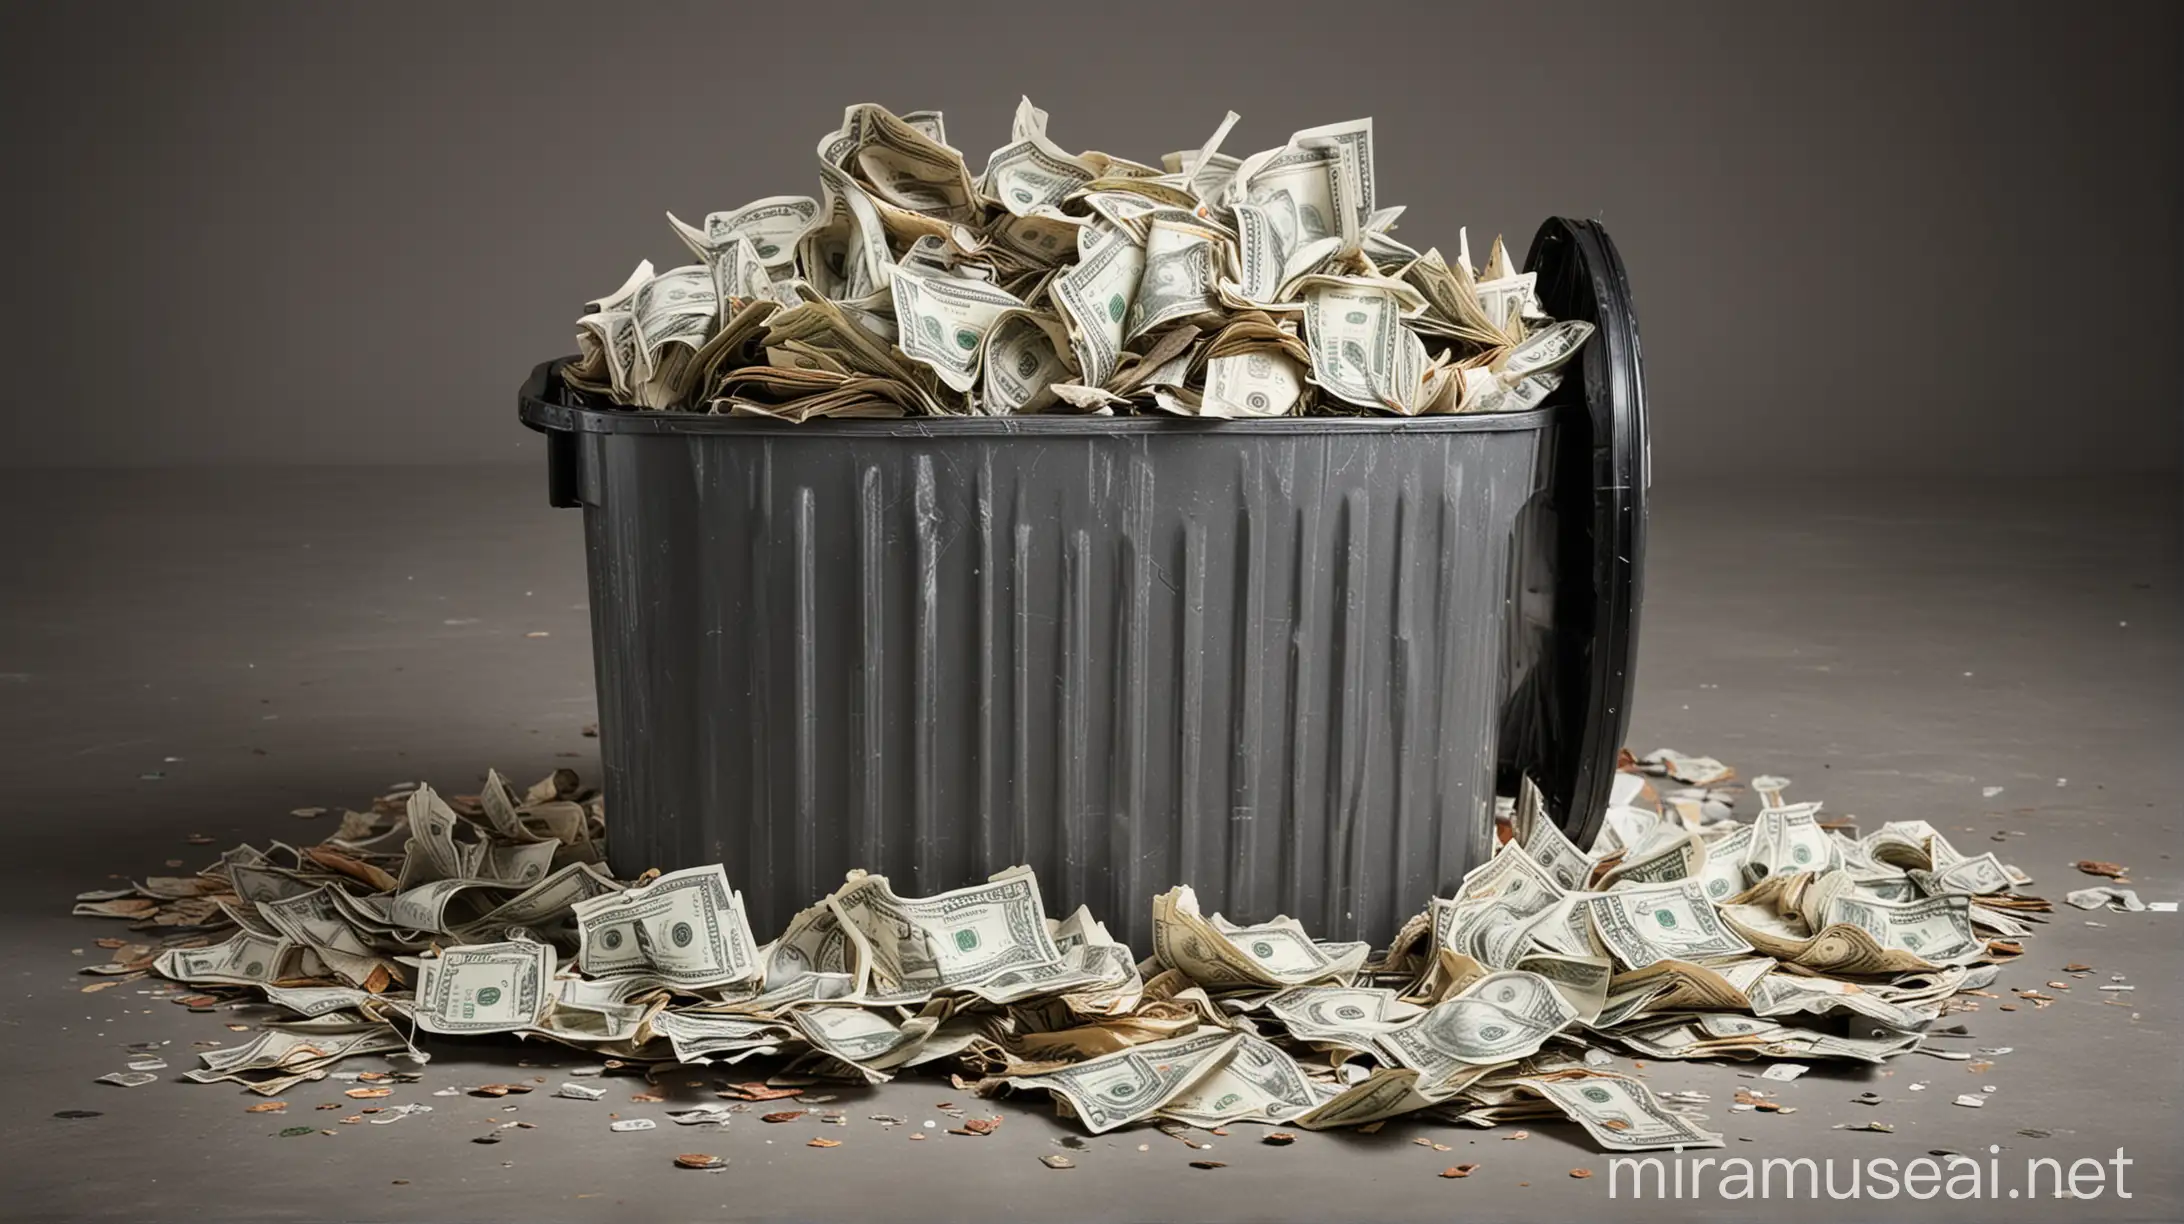 Side view of trash can full of crumpled up and discarded money